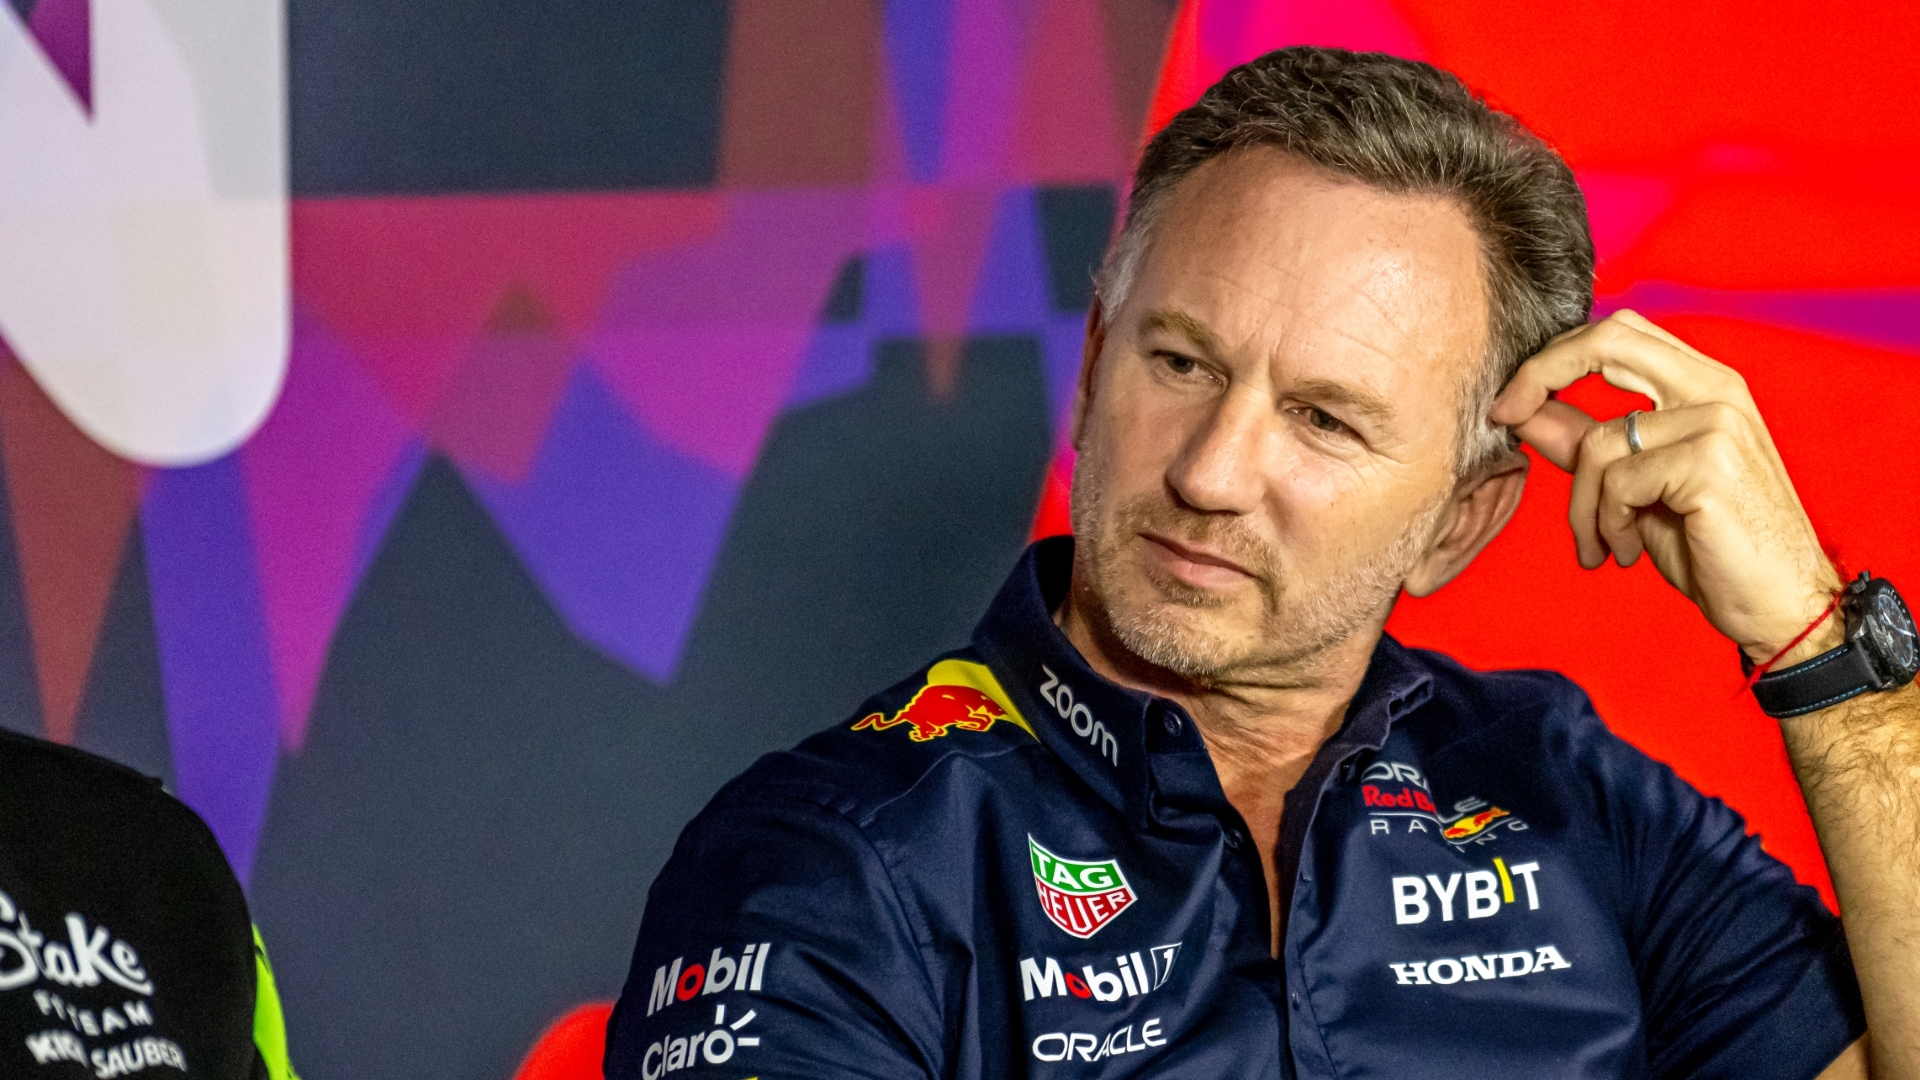 Why there are still 'a lot of questions' around investigation into Horner